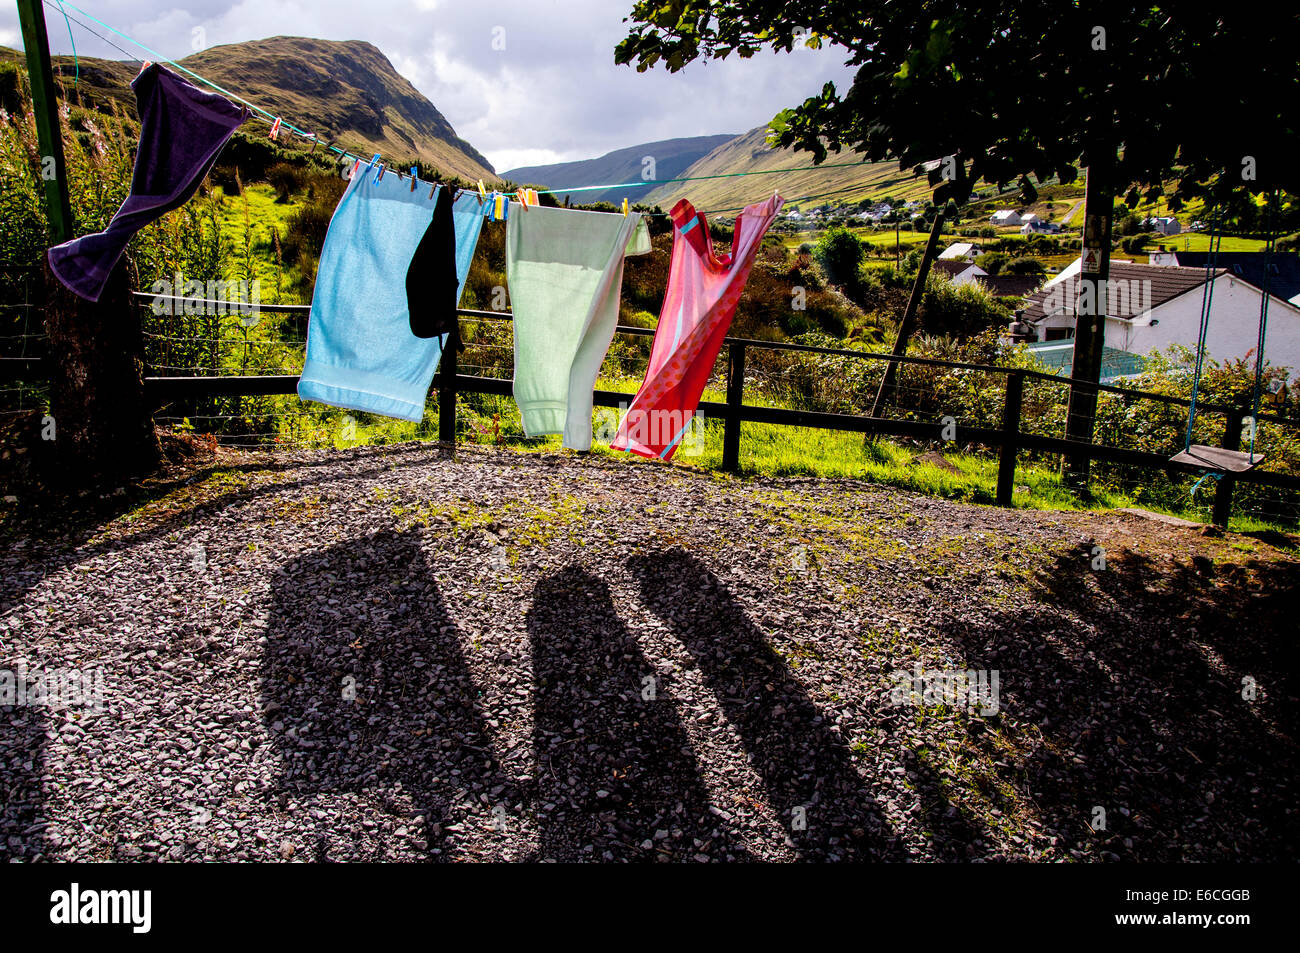 Washing drying on line in rural Ireland landscape Stock Photo